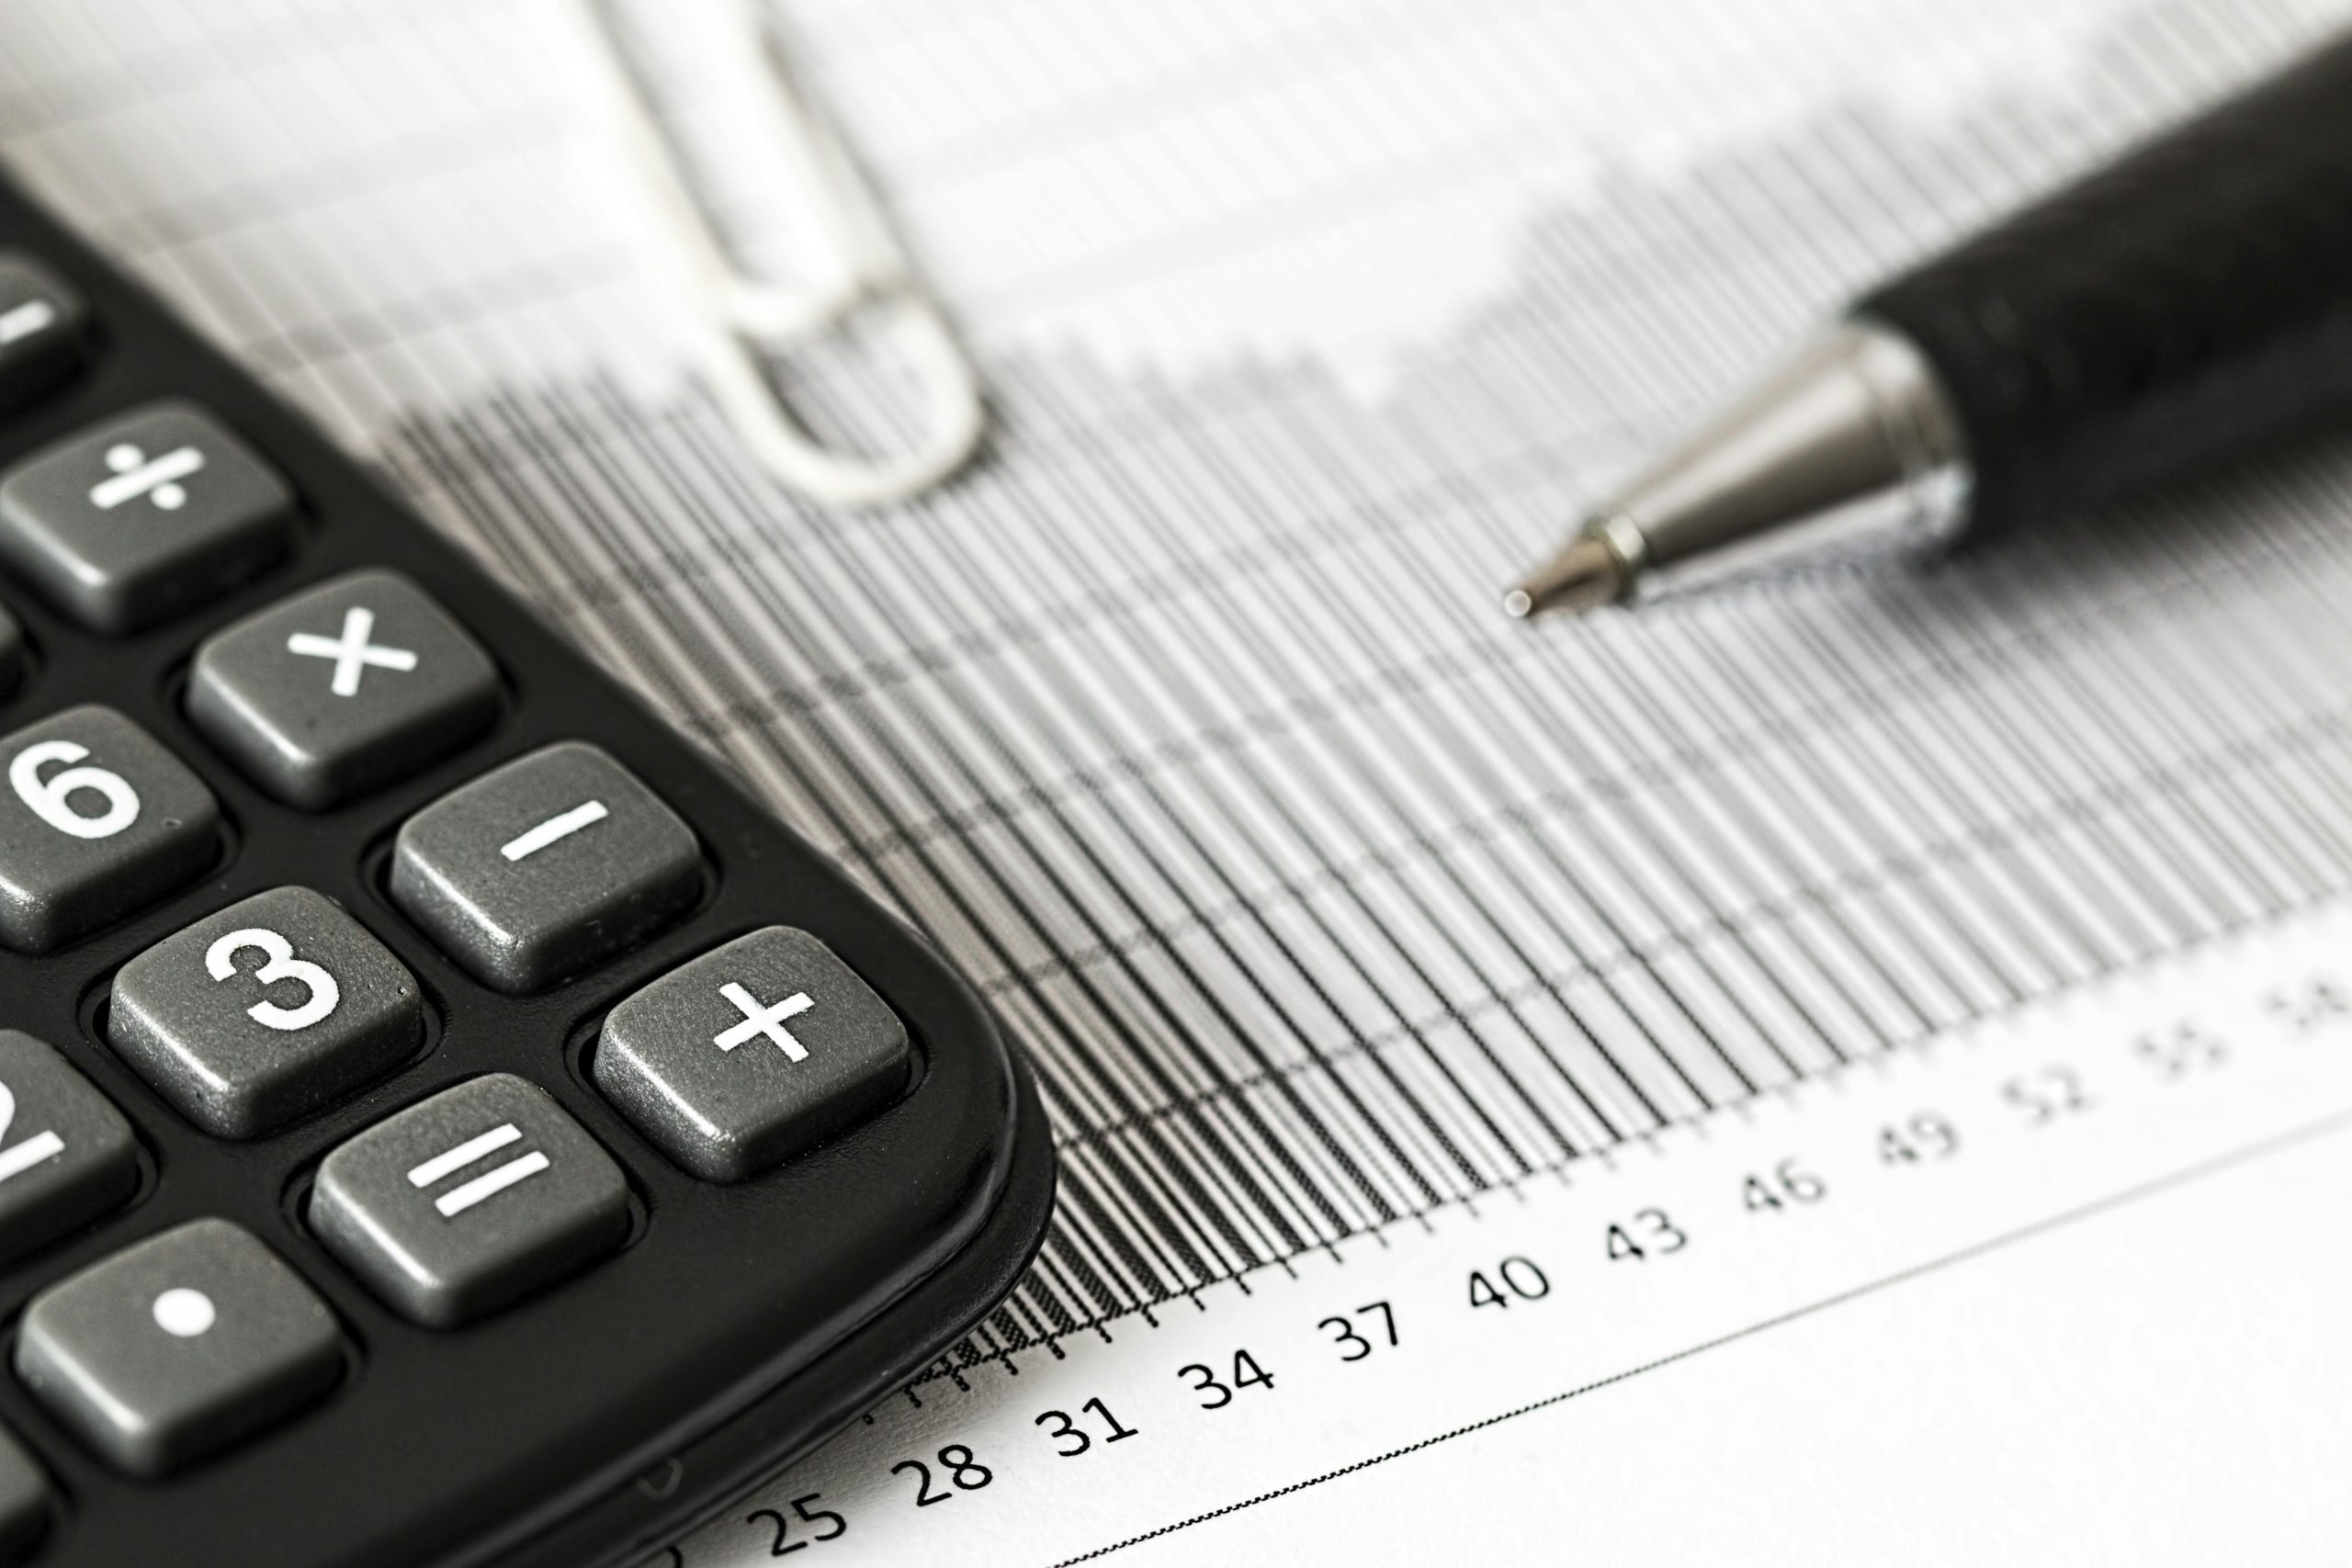 Small business accounting in Reno can help with your needs